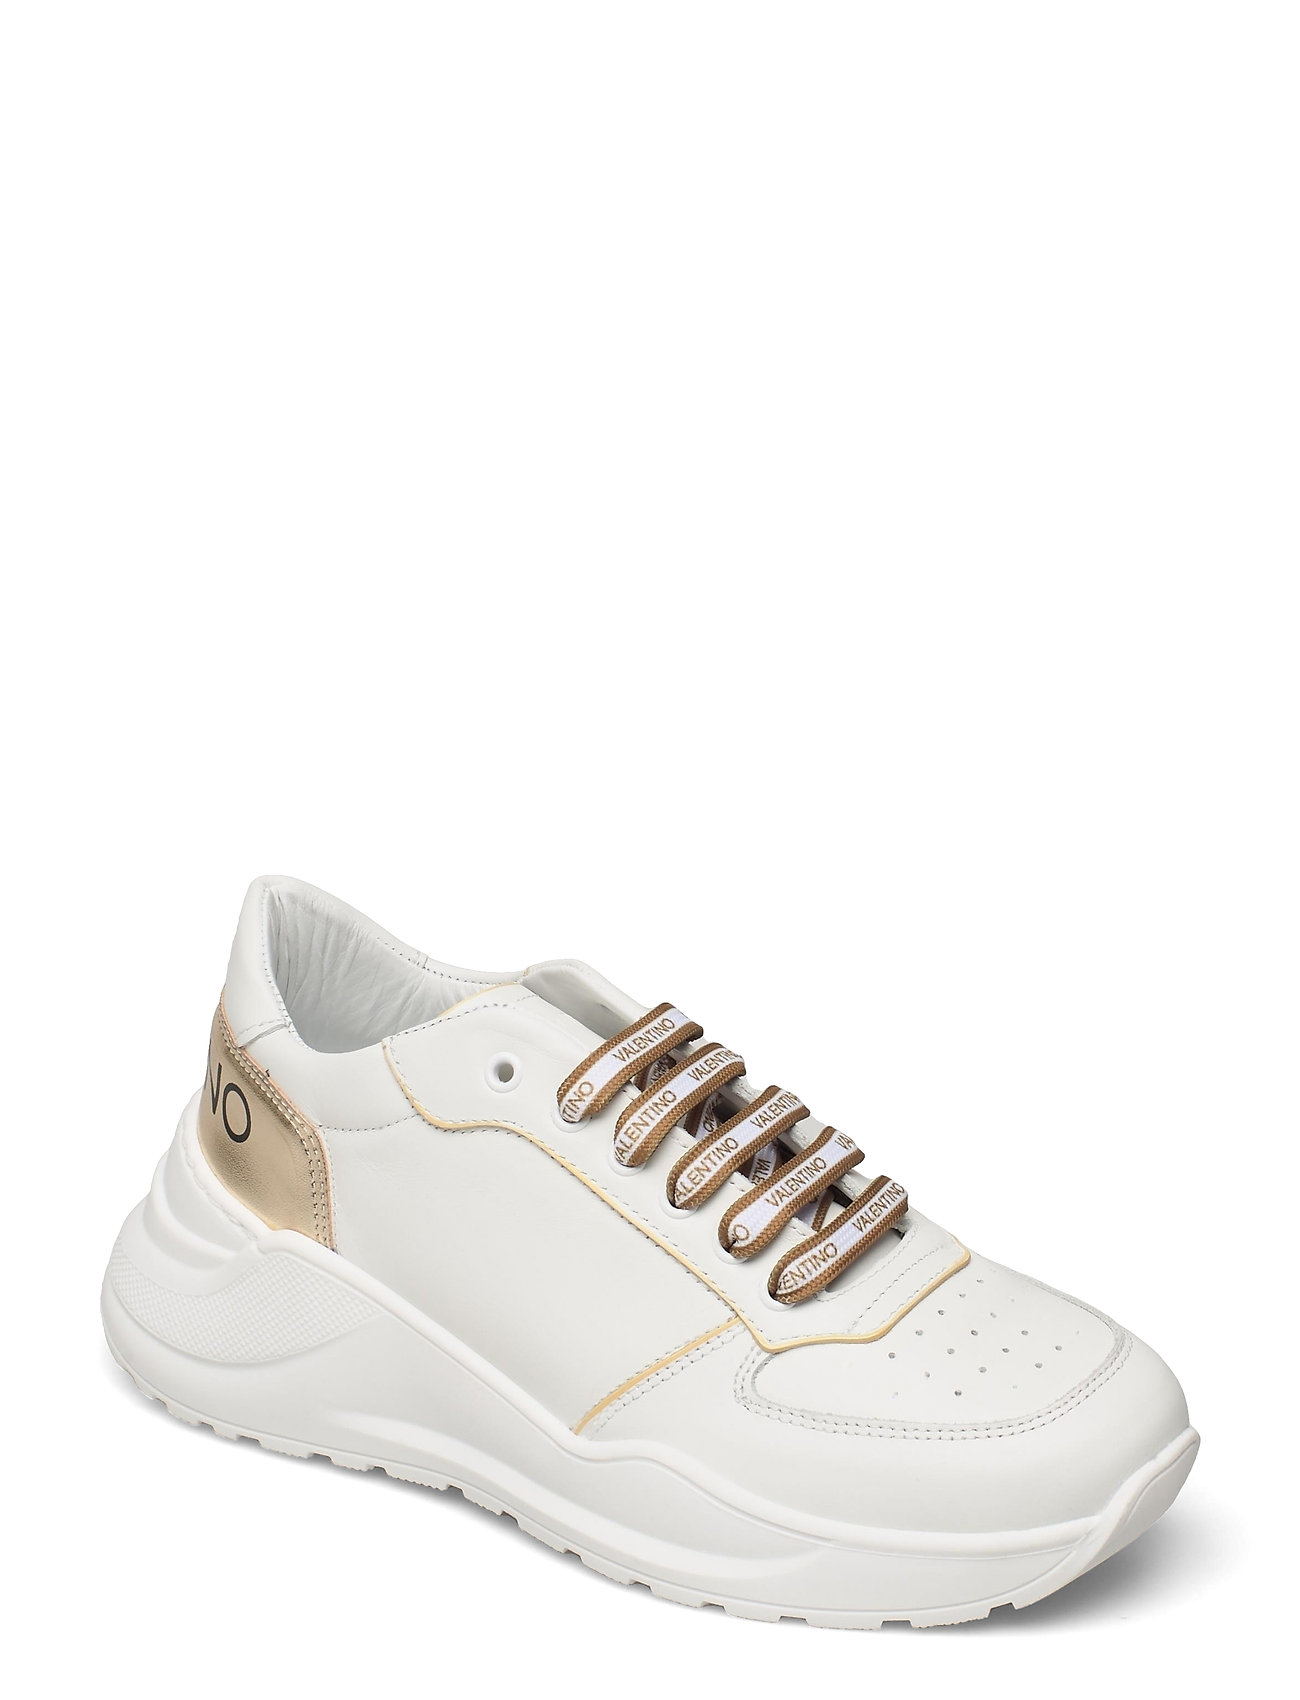 Valentino Shoes sneakers – Running Low-top Sneakers Valentino Shoes til i Hvid - Pashion.dk